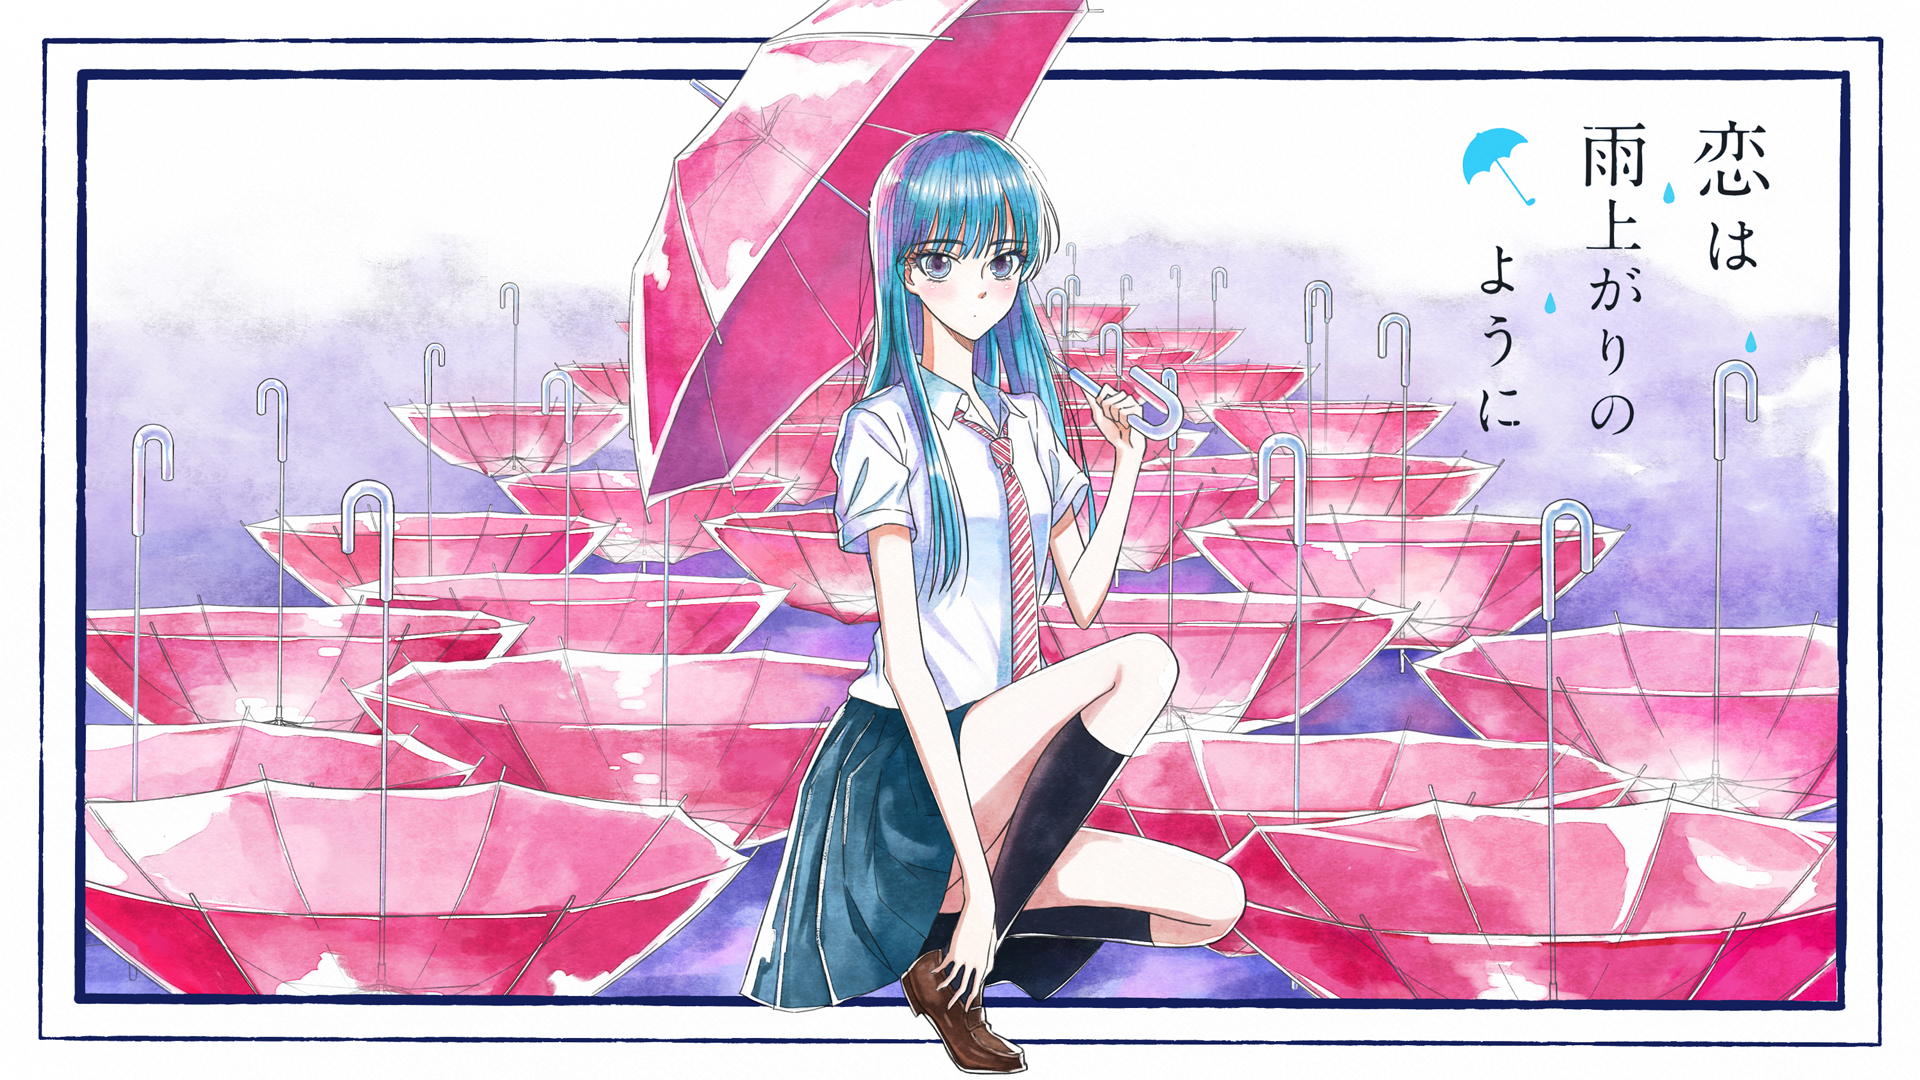 Anime 1920x1080 After the Rain anime watercolor